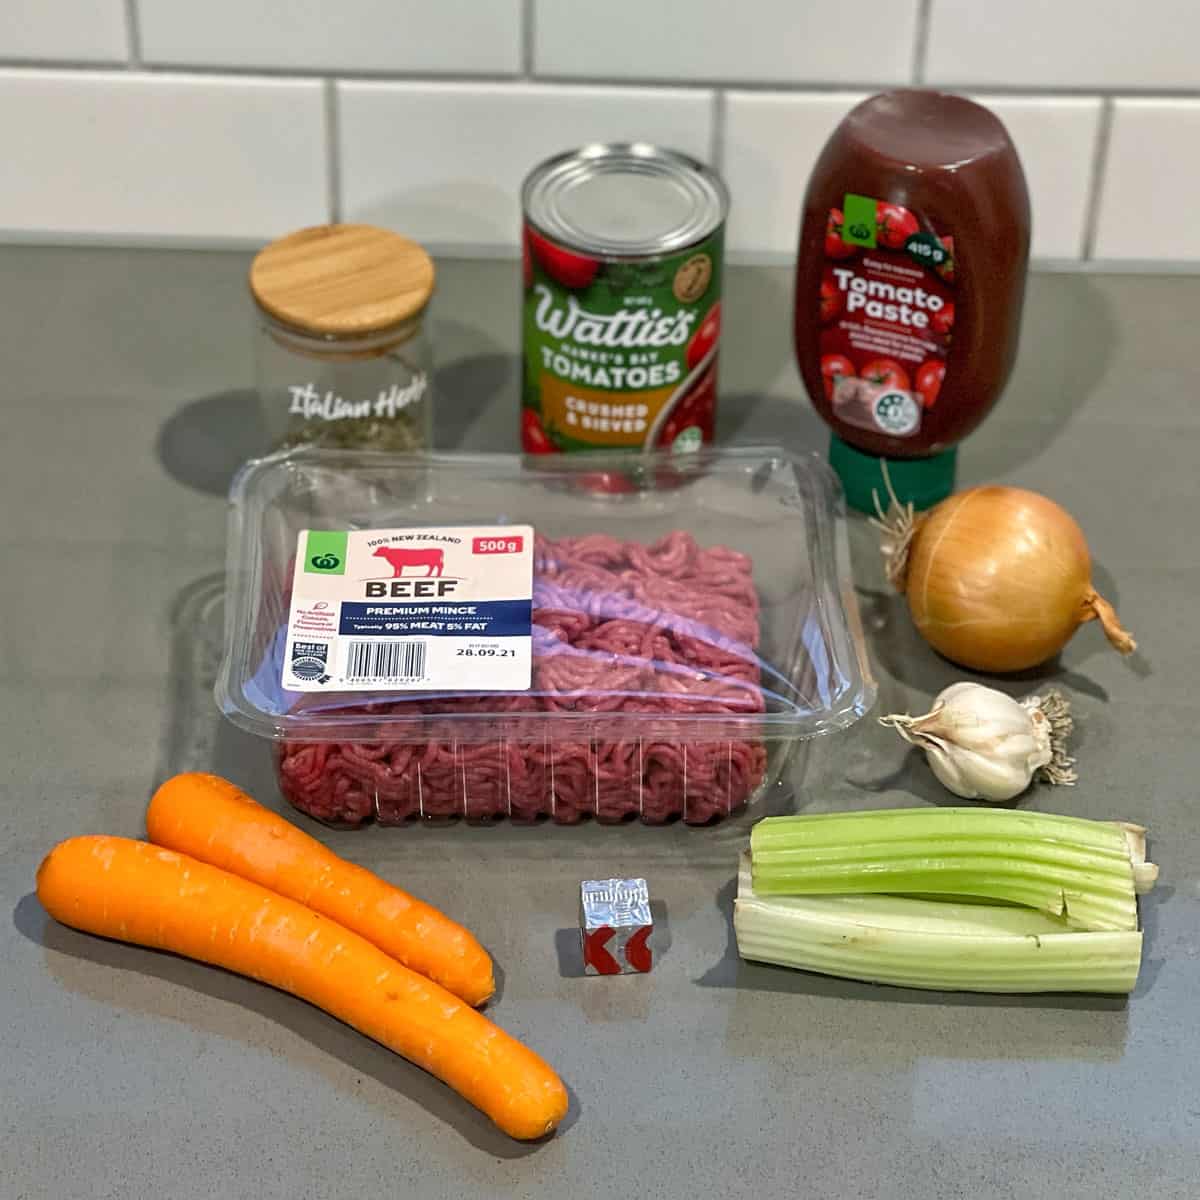 Ingredients for Spaghetti Bolognese on a grey bench